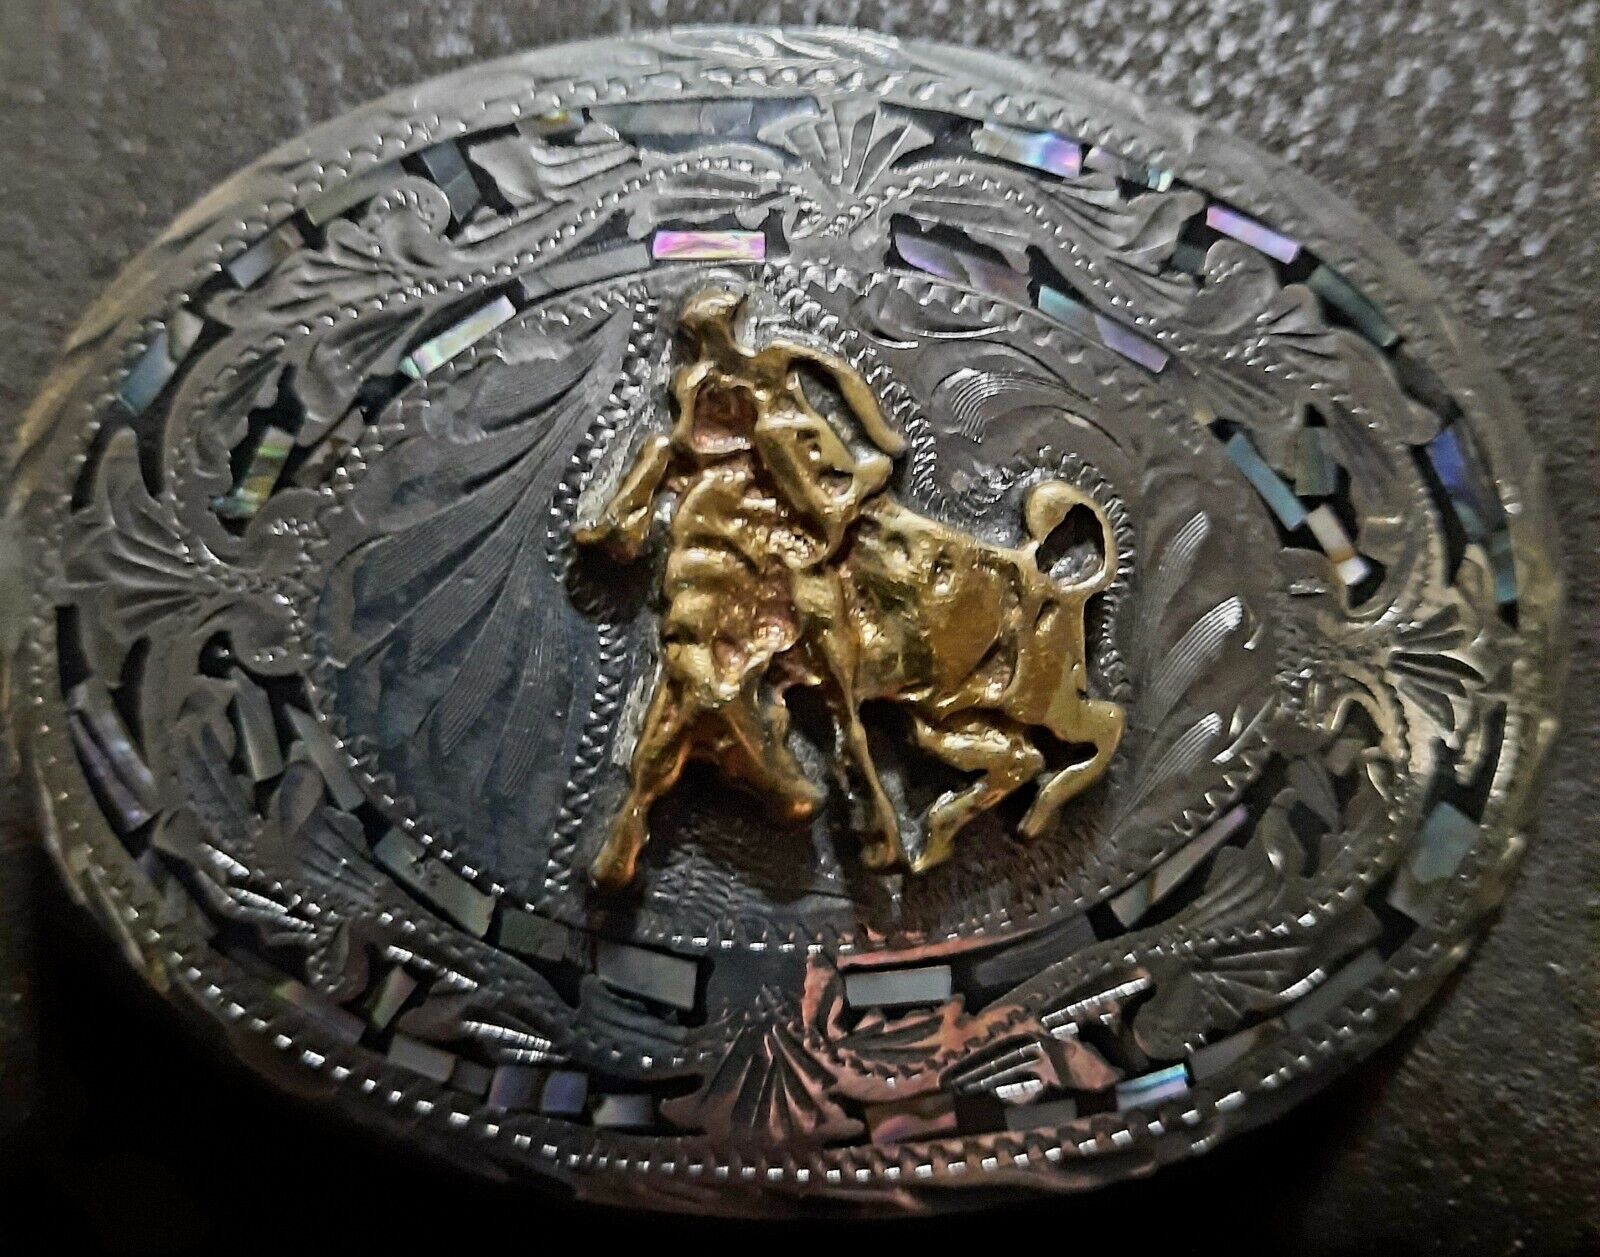 SILVER ABALONE INLAID BULLRIDING RODEO SOUTHWEST … - image 2